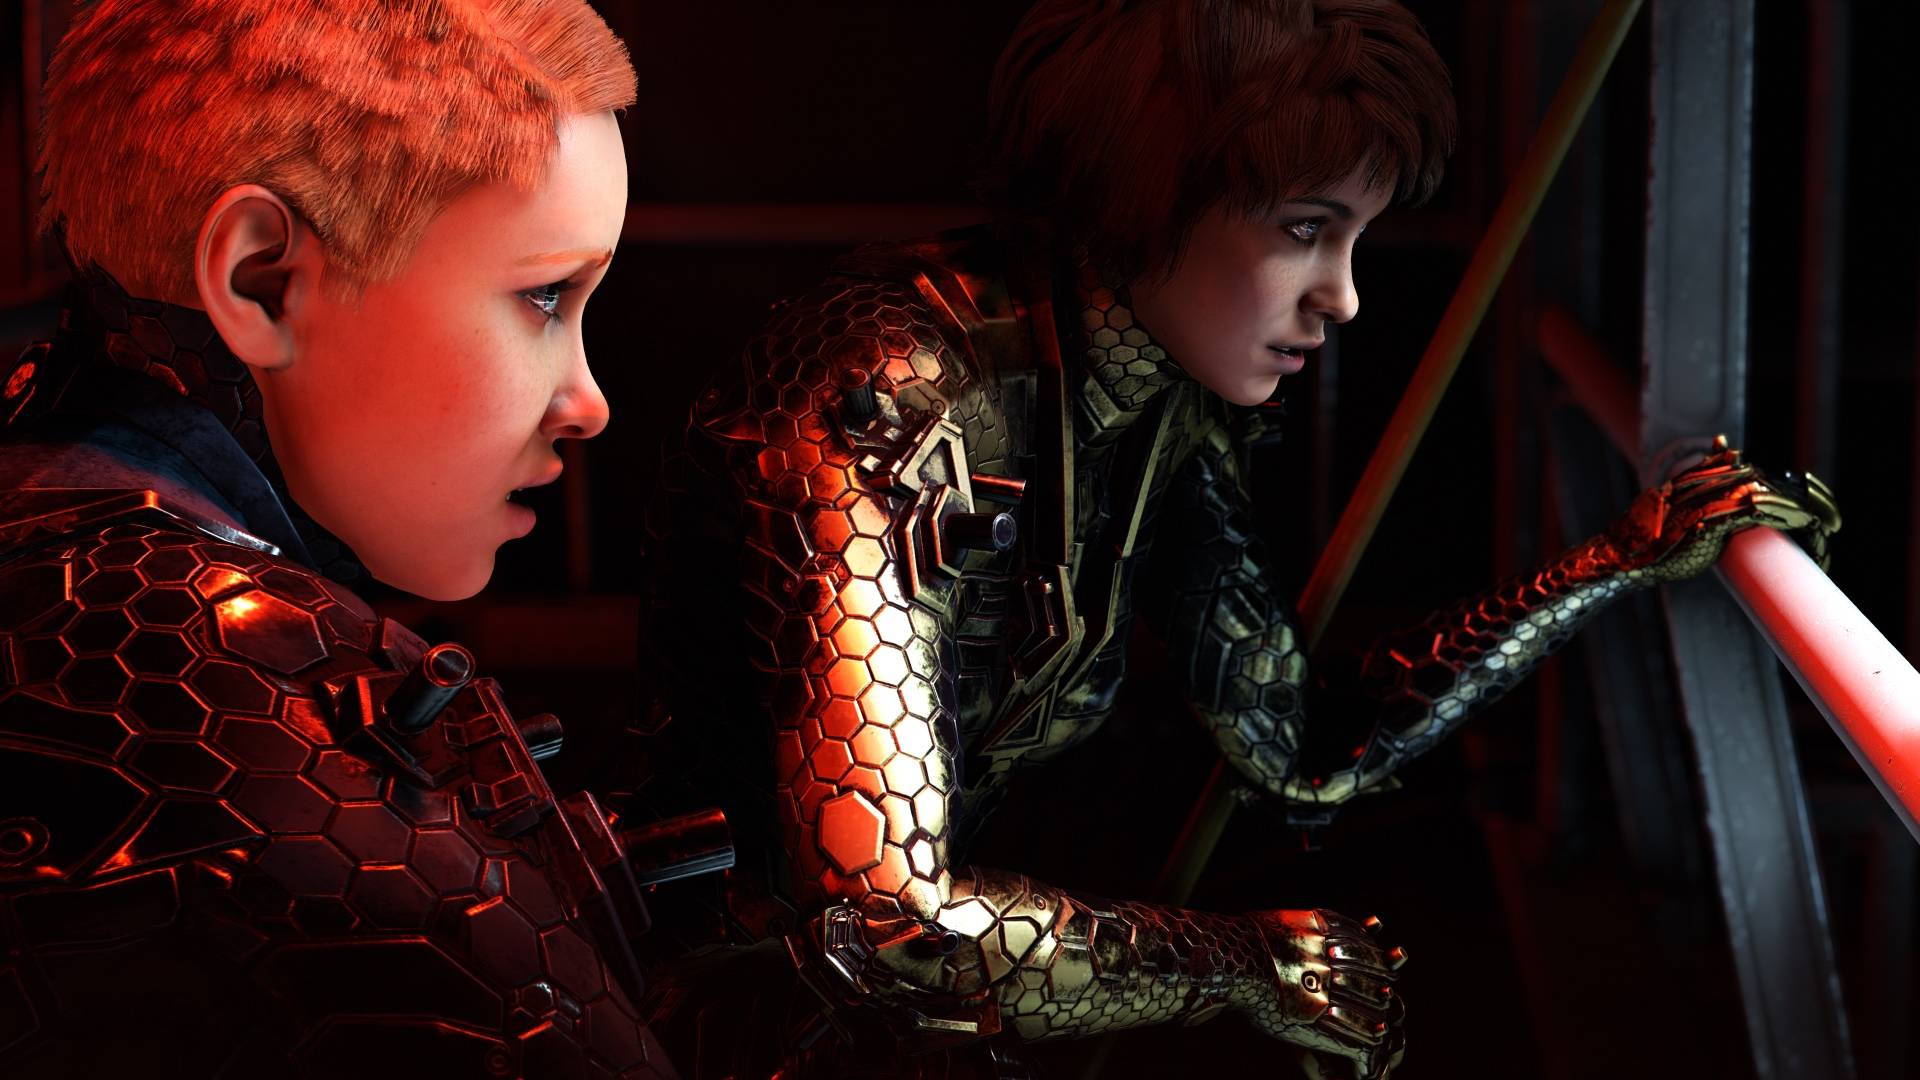 Wolfenstein: Youngblood will launch earlier than expected on PC